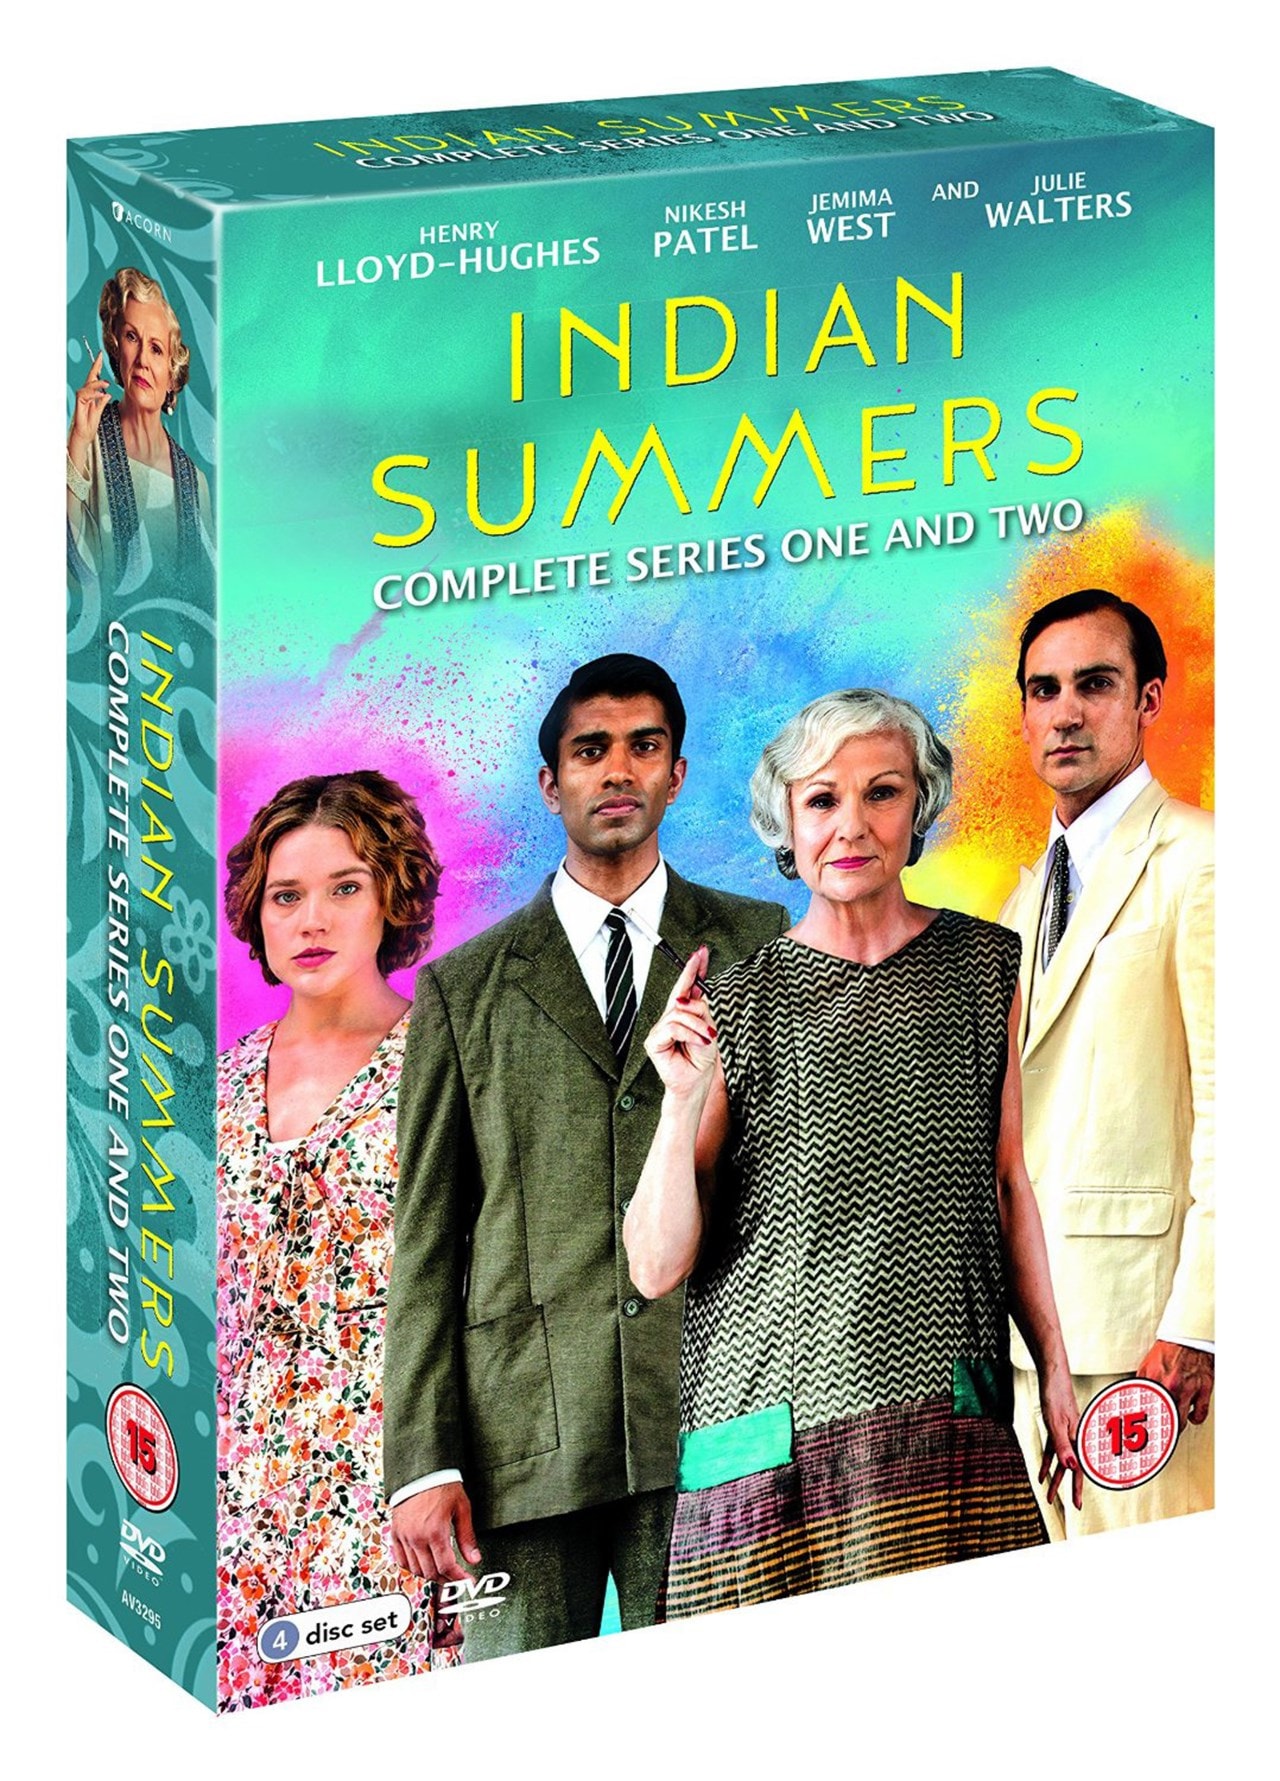 Indian Summers Complete Series One And Two Dvd Box Set Free Shipping Over £20 Hmv Store